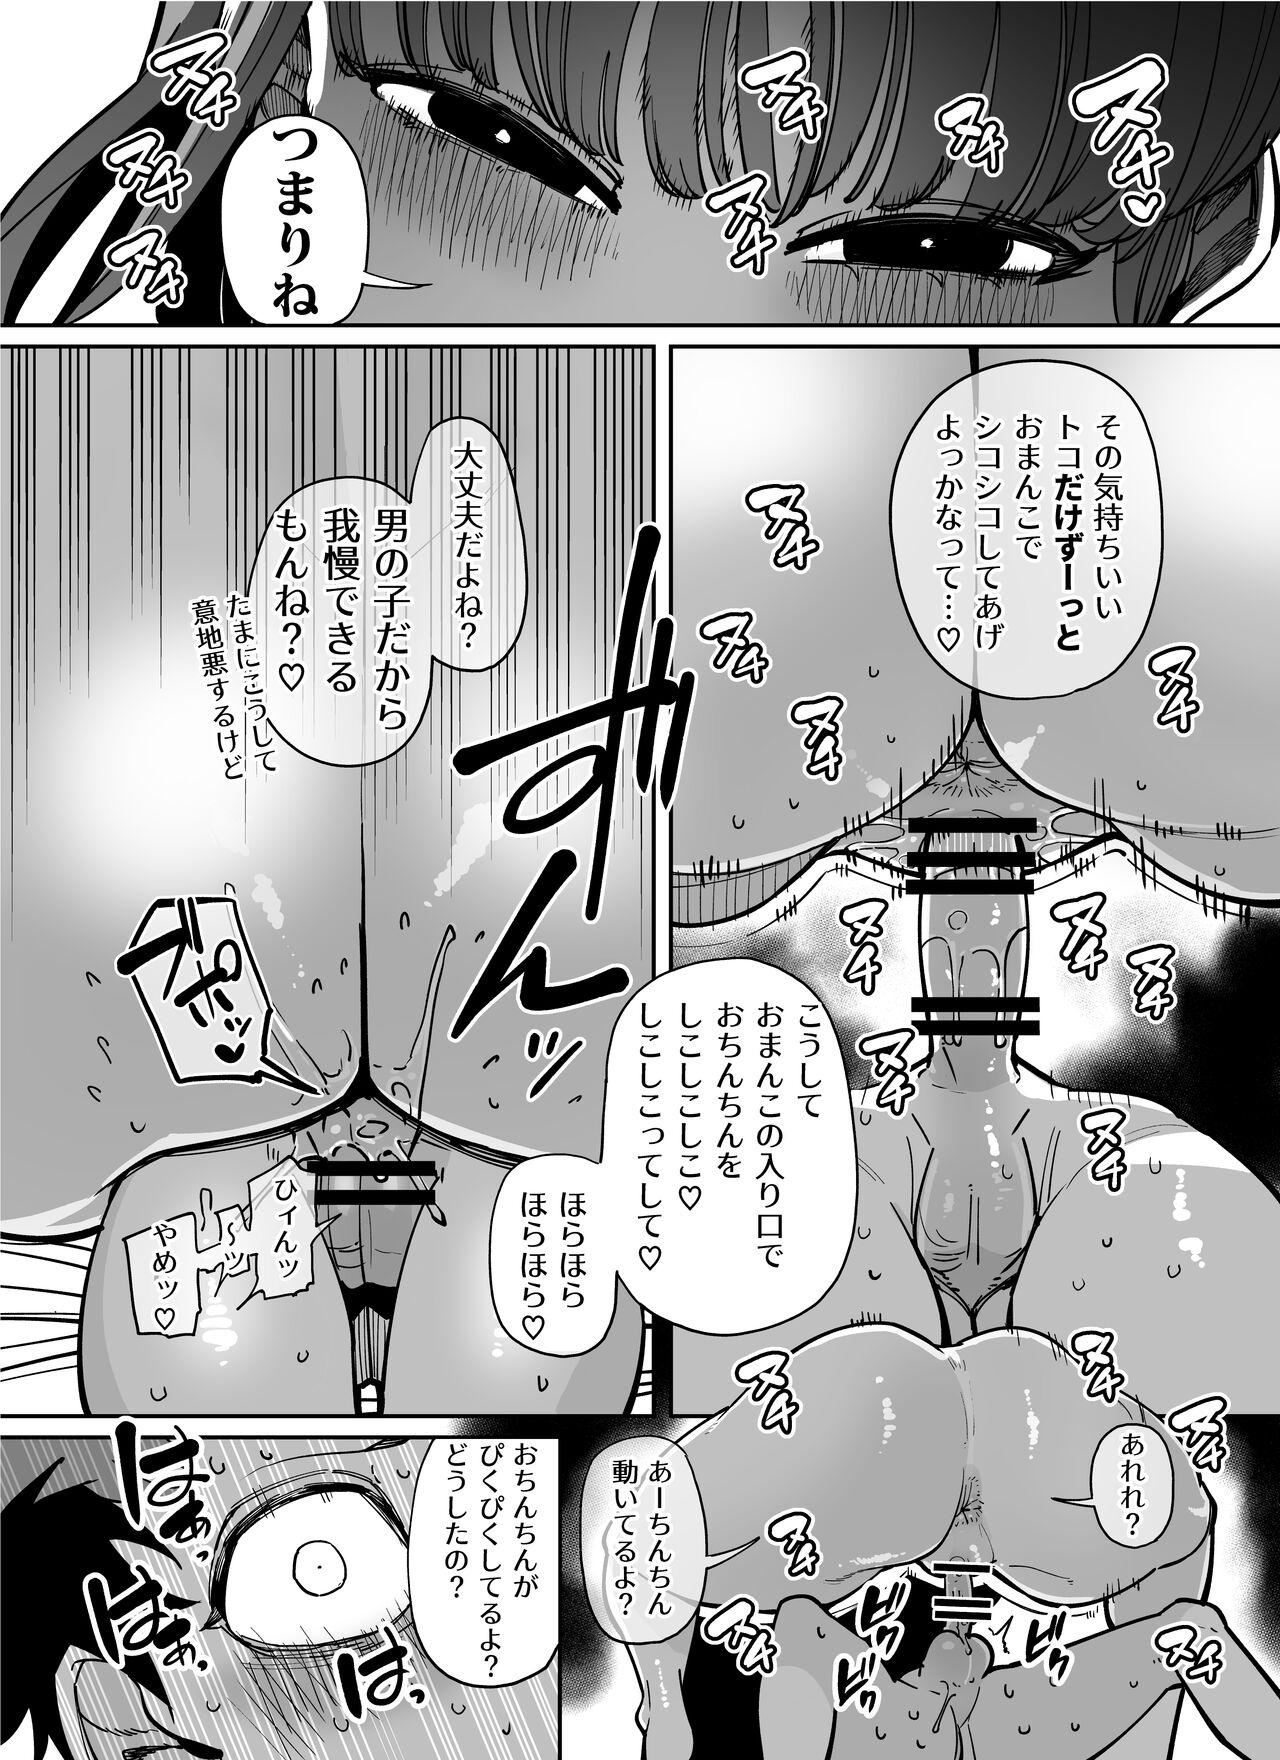 Gayemo 「言ったね？」 Pussy Fingering - Page 6